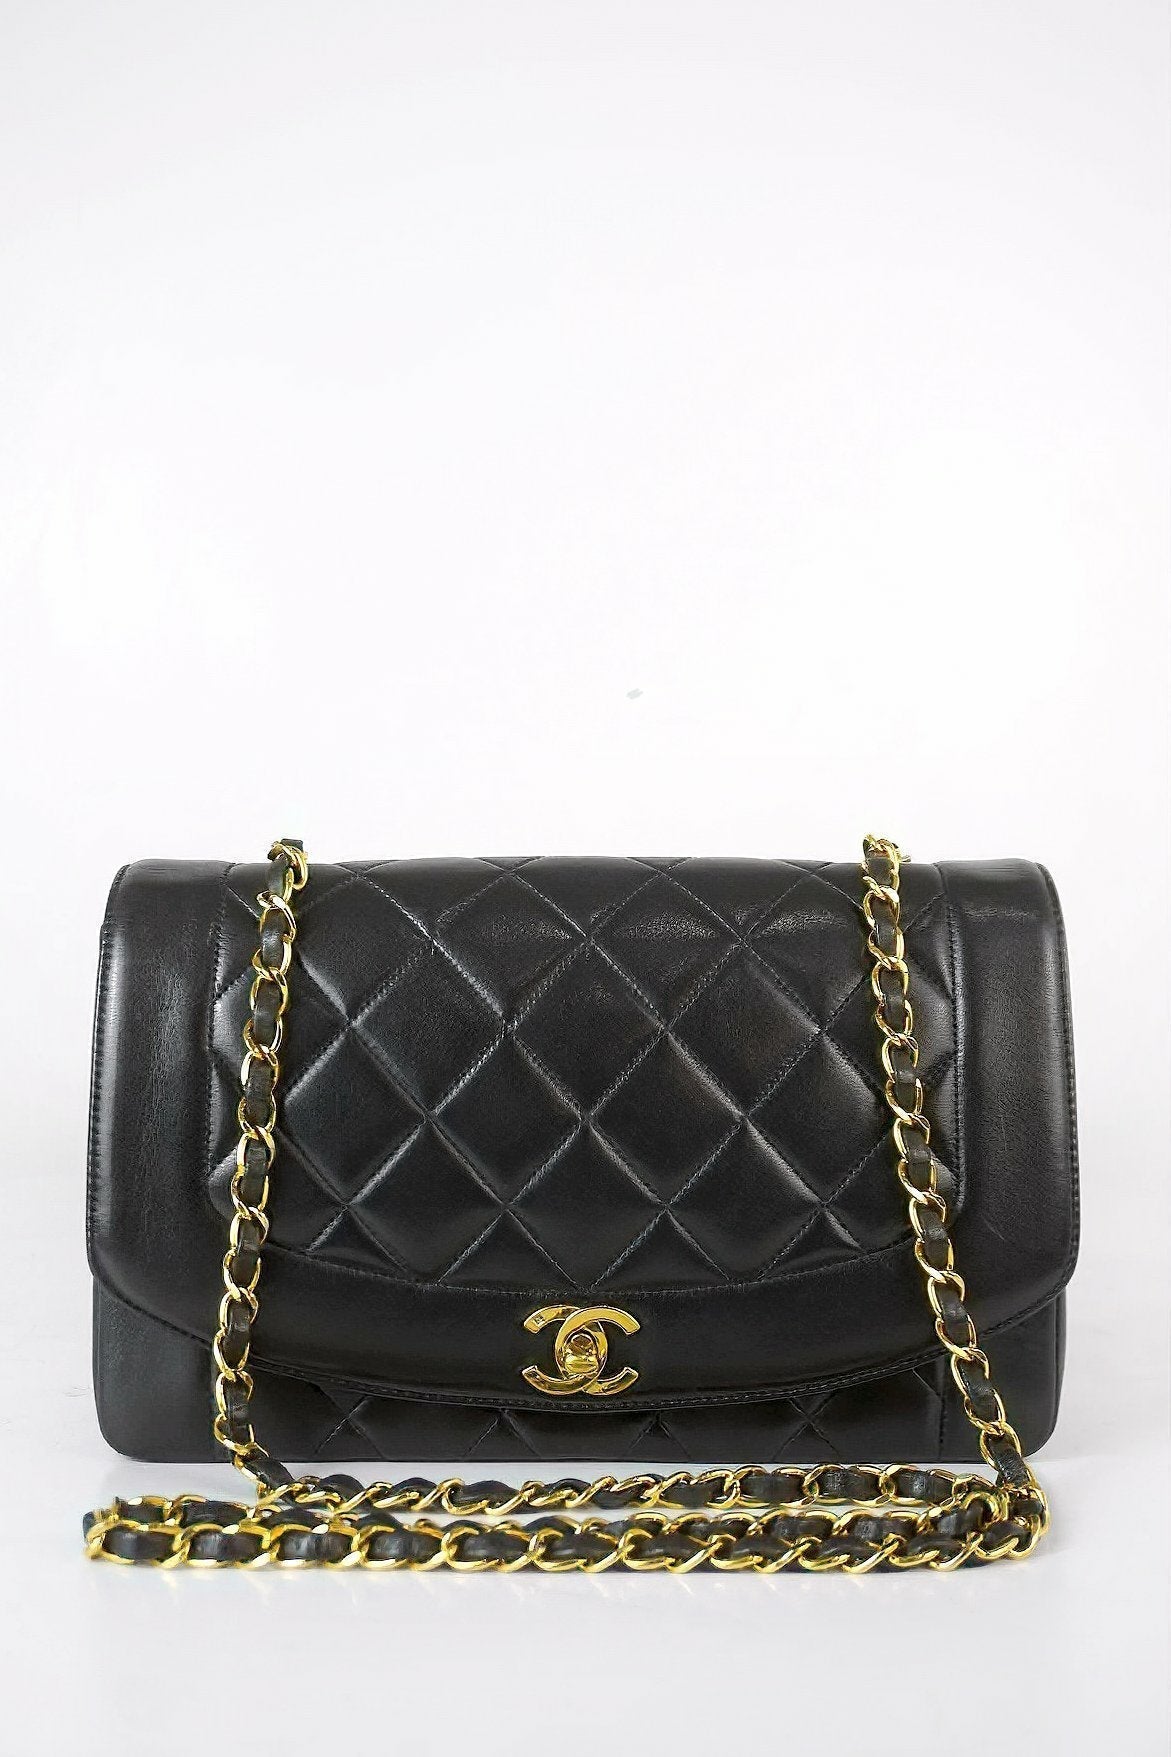 Chanel Vintage Diana Napa Quilted Leather Flap Bag 1991-1994